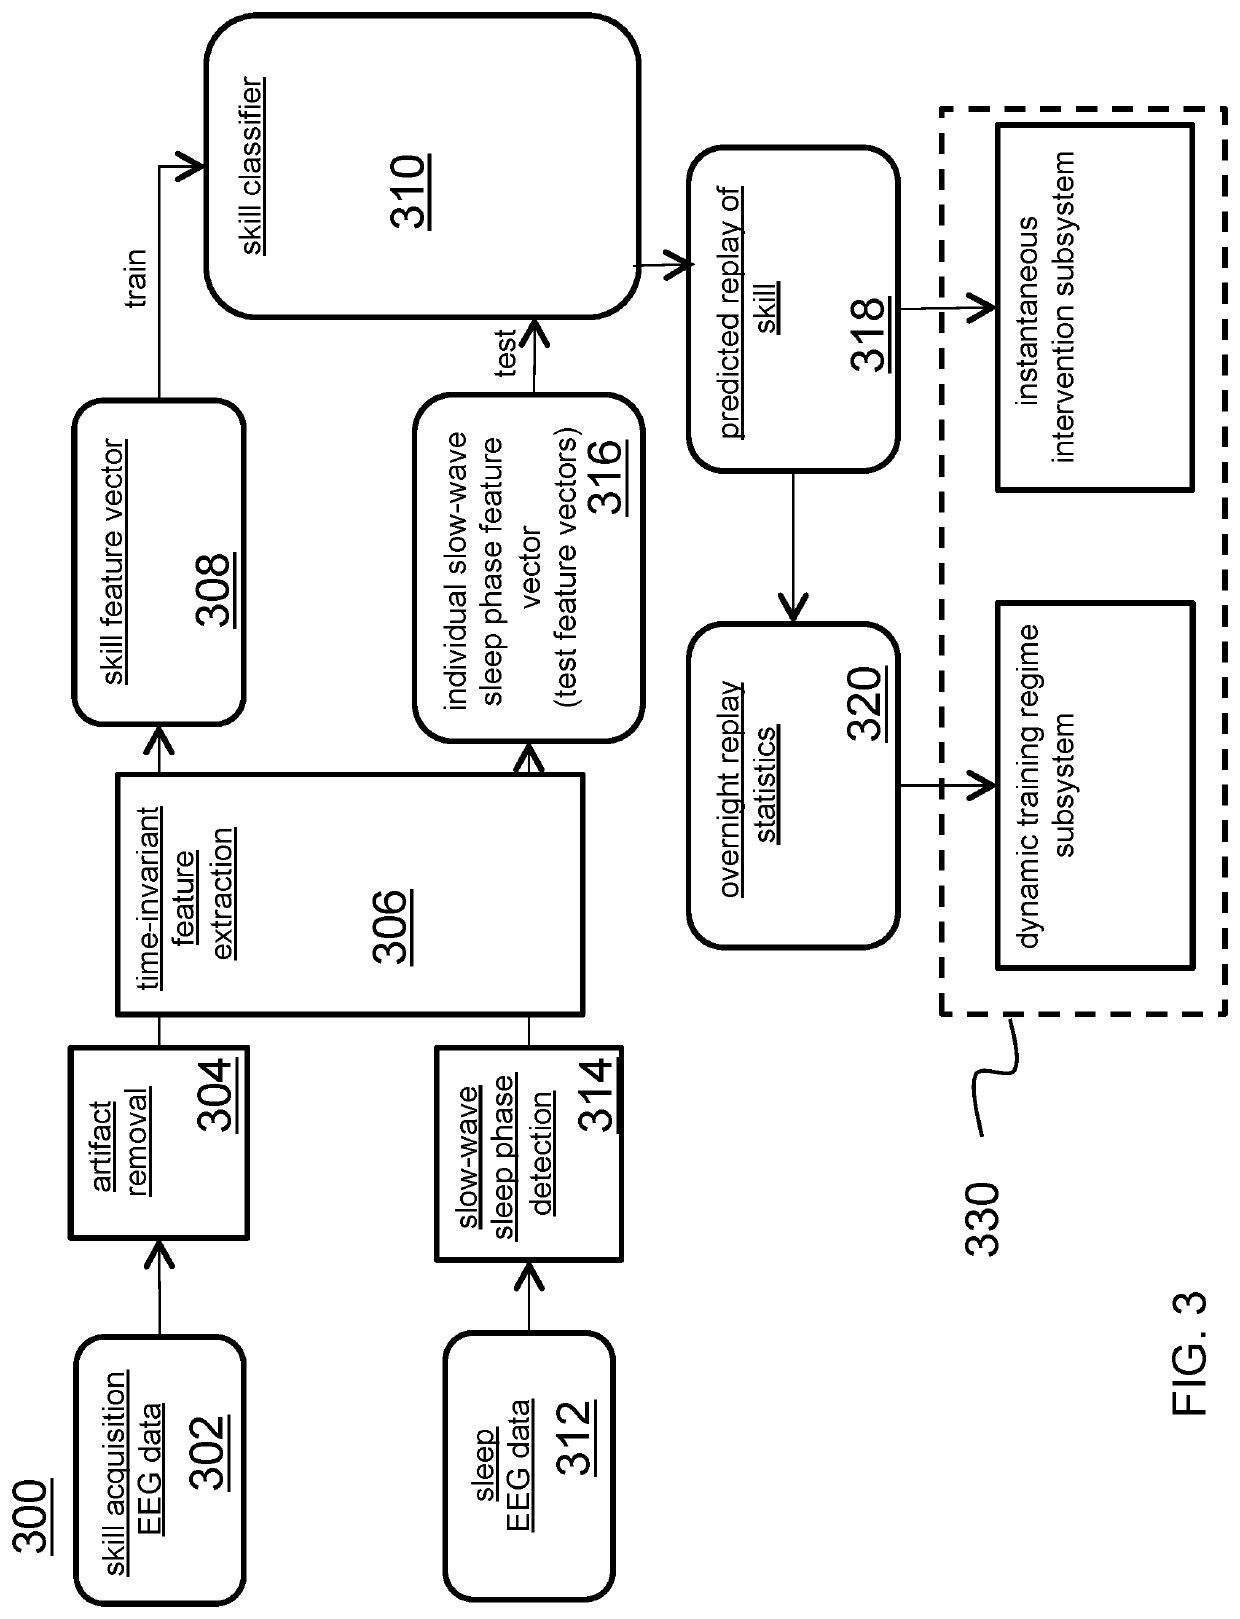 System and method for decoding and behaviorally validating memory consolidation during sleep from EEG after waking experience